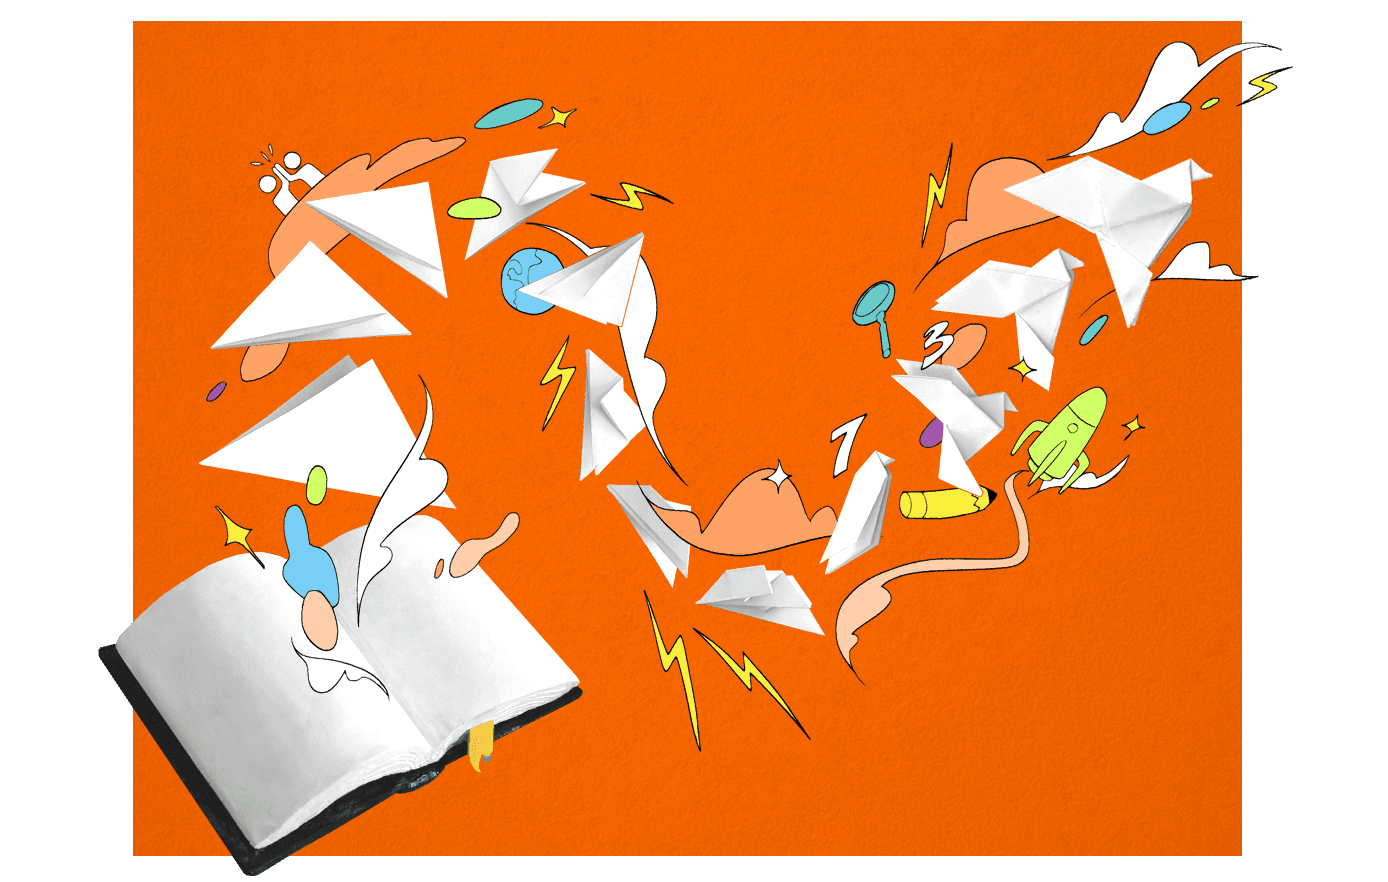 Paper planes and various objects bursting energetically from an open book on an orange background.